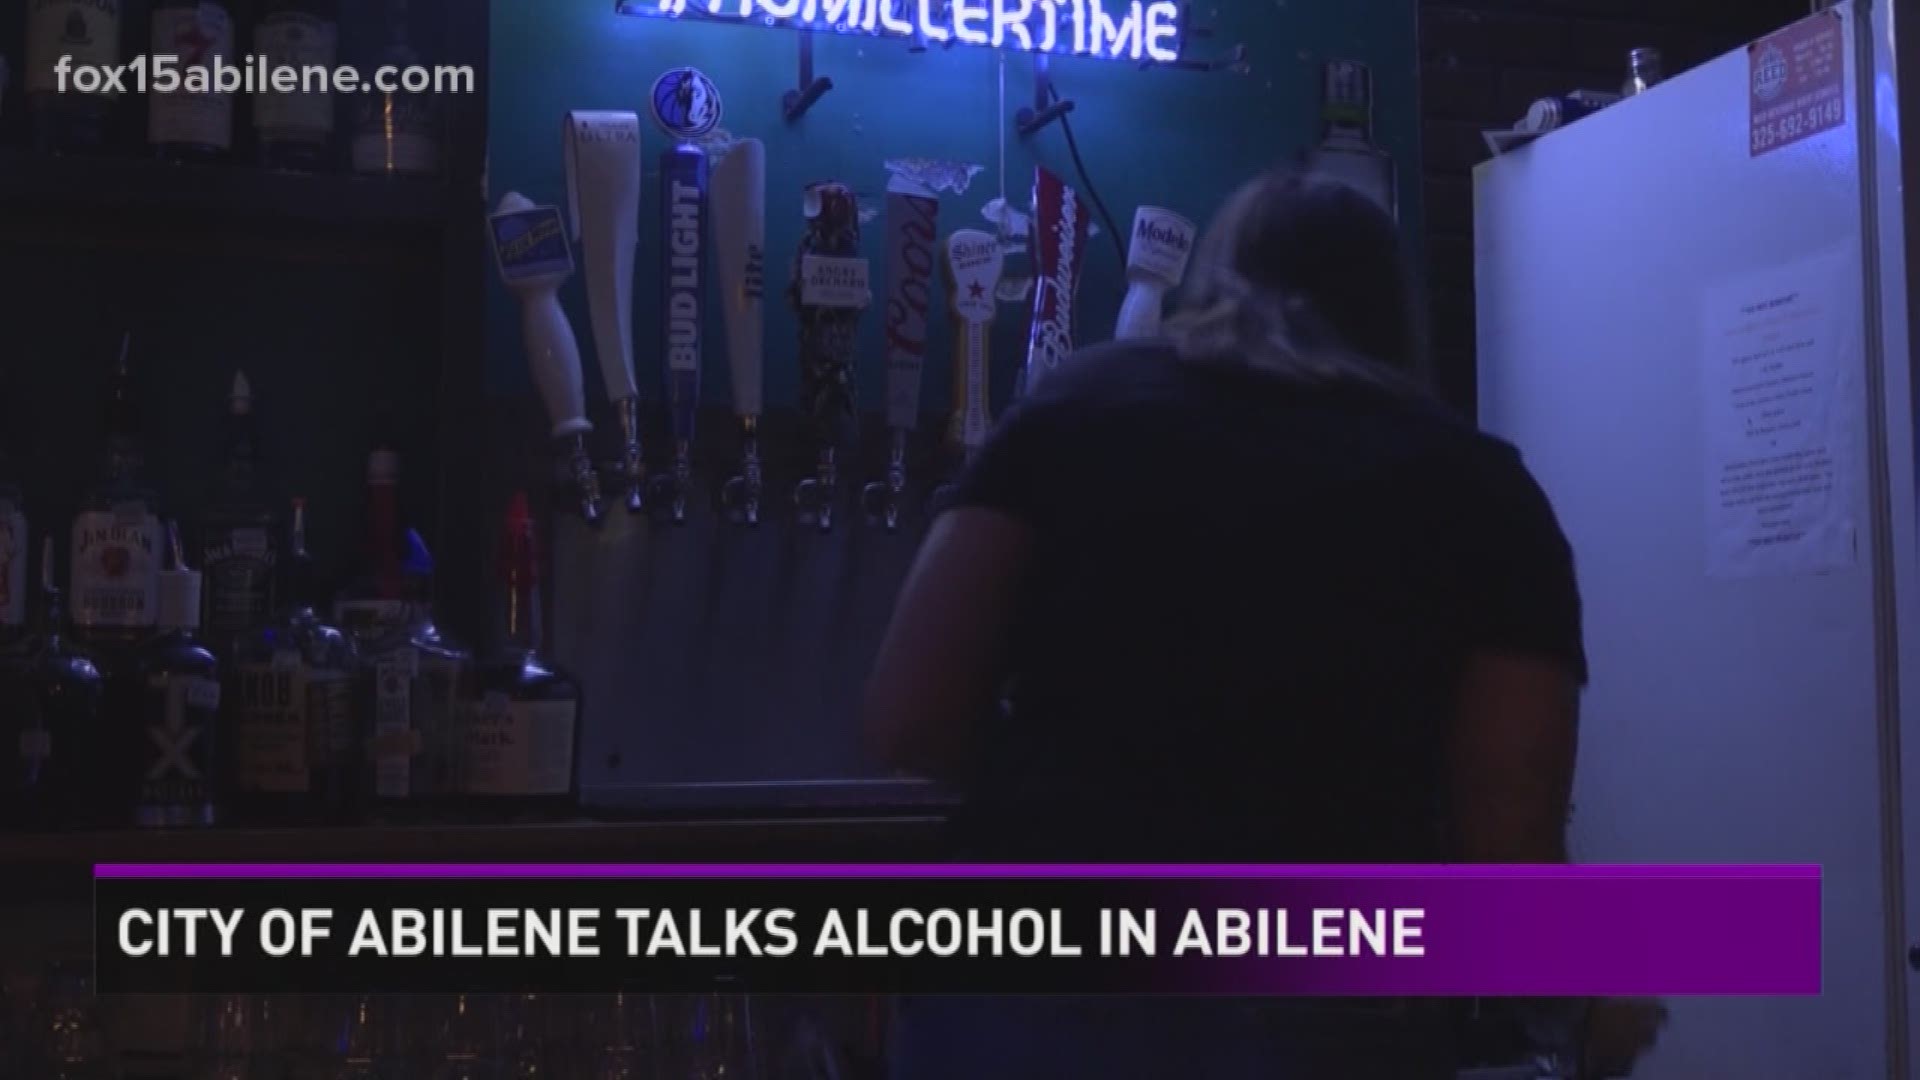 Abilene talks about up and coming alchol